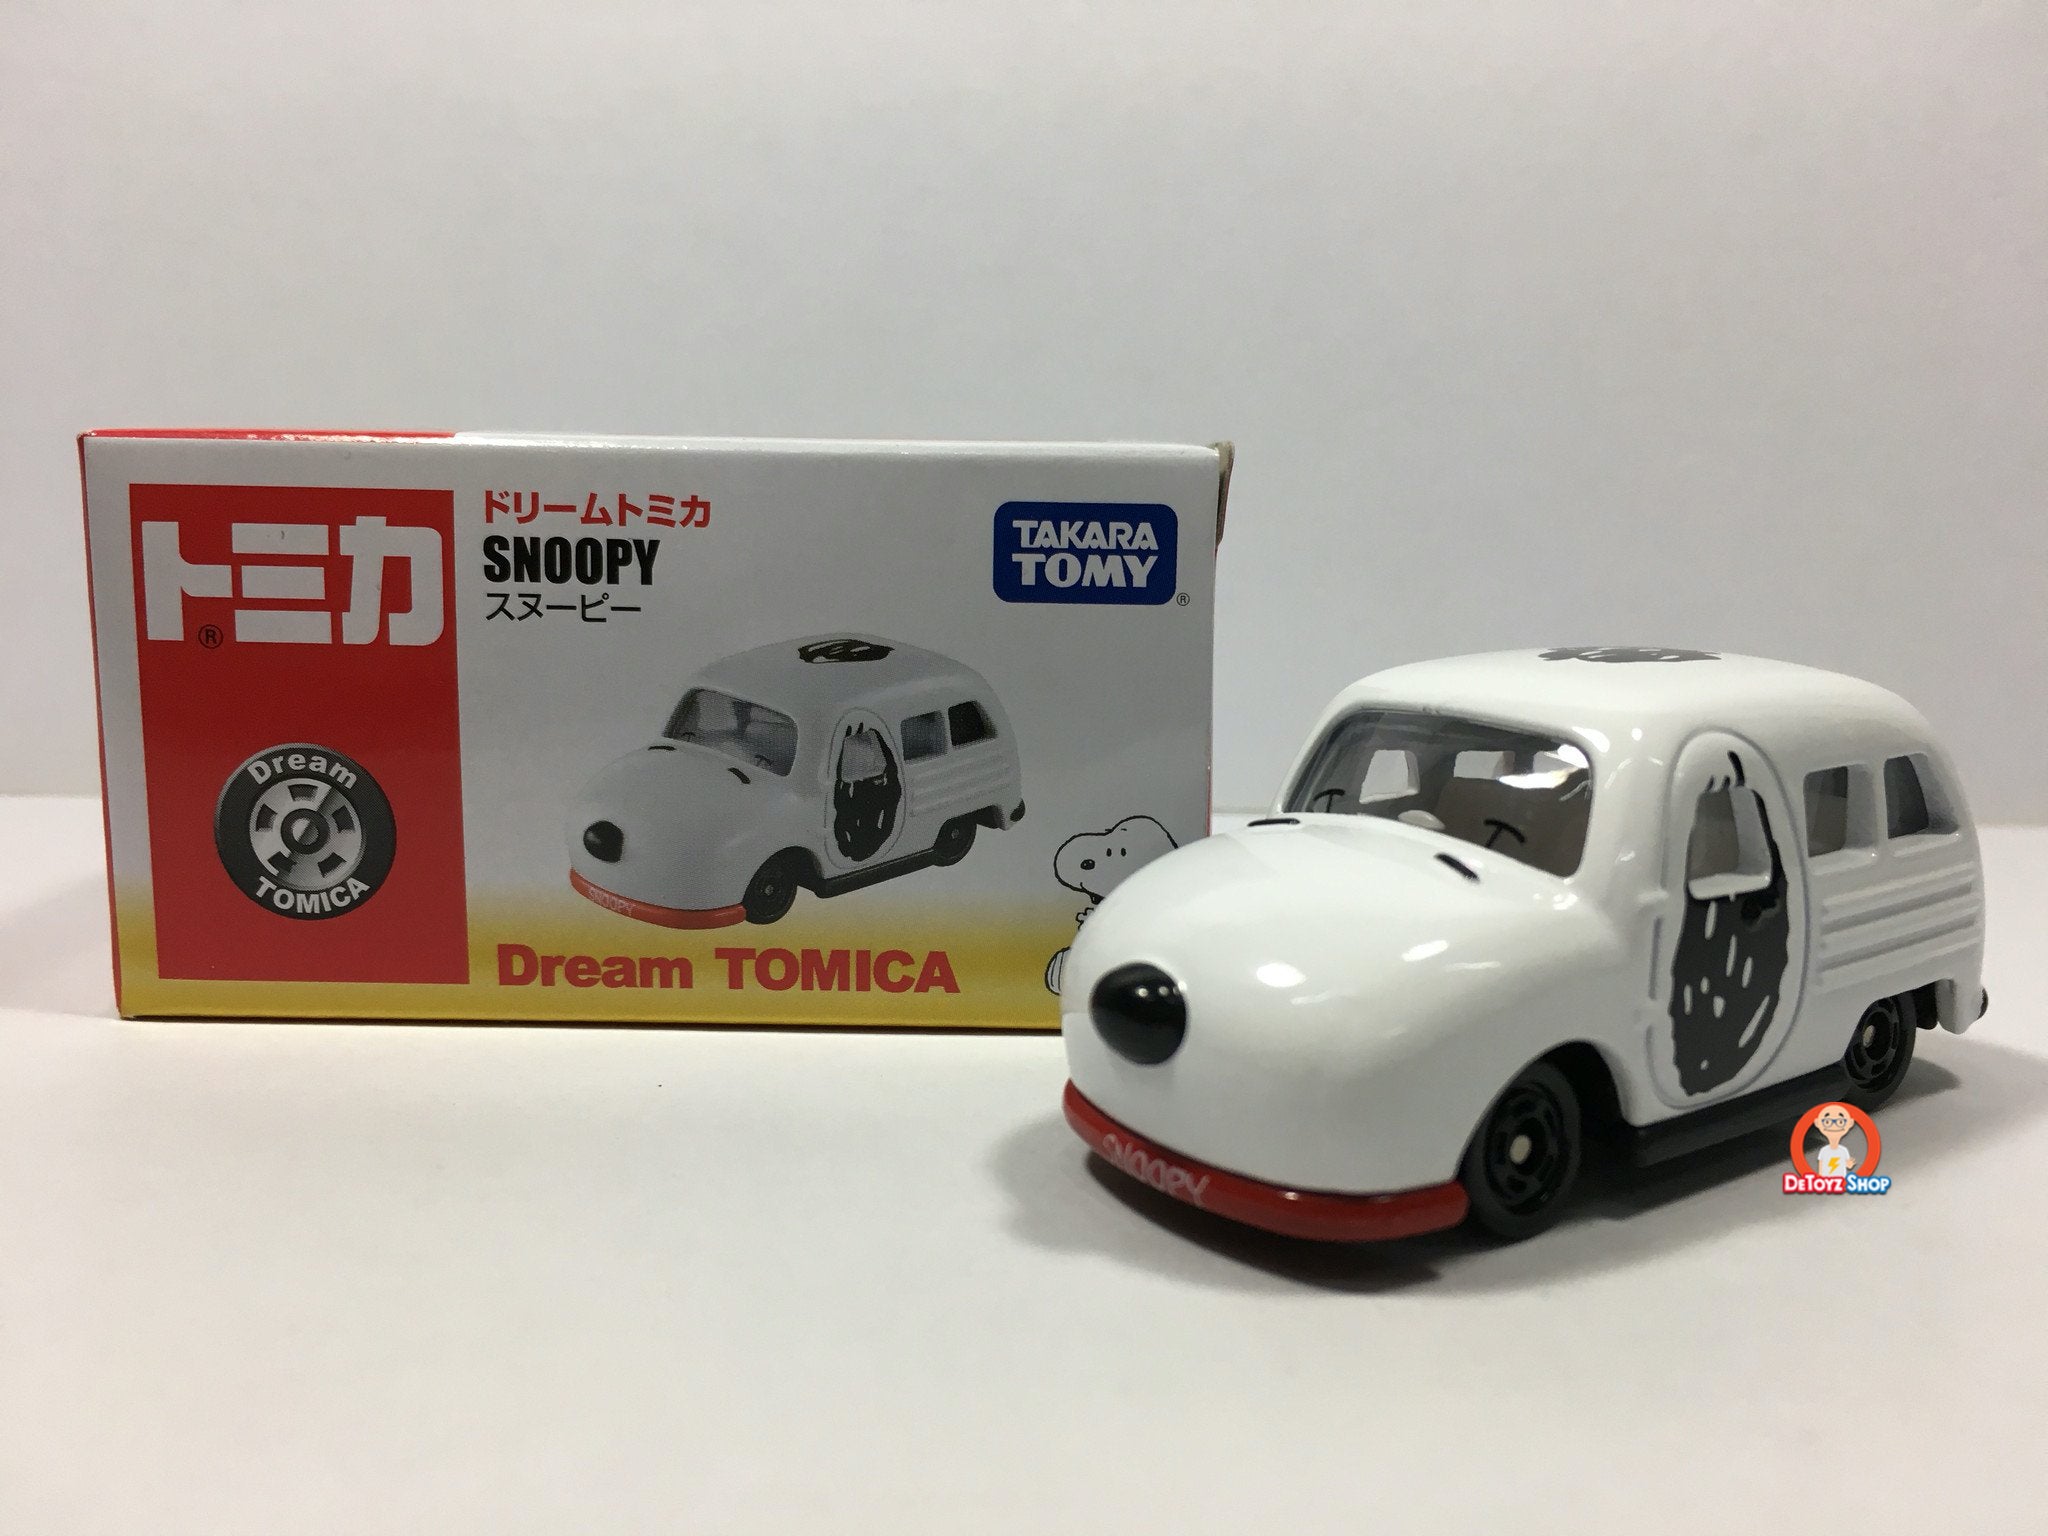 Dream Tomica Snoopy